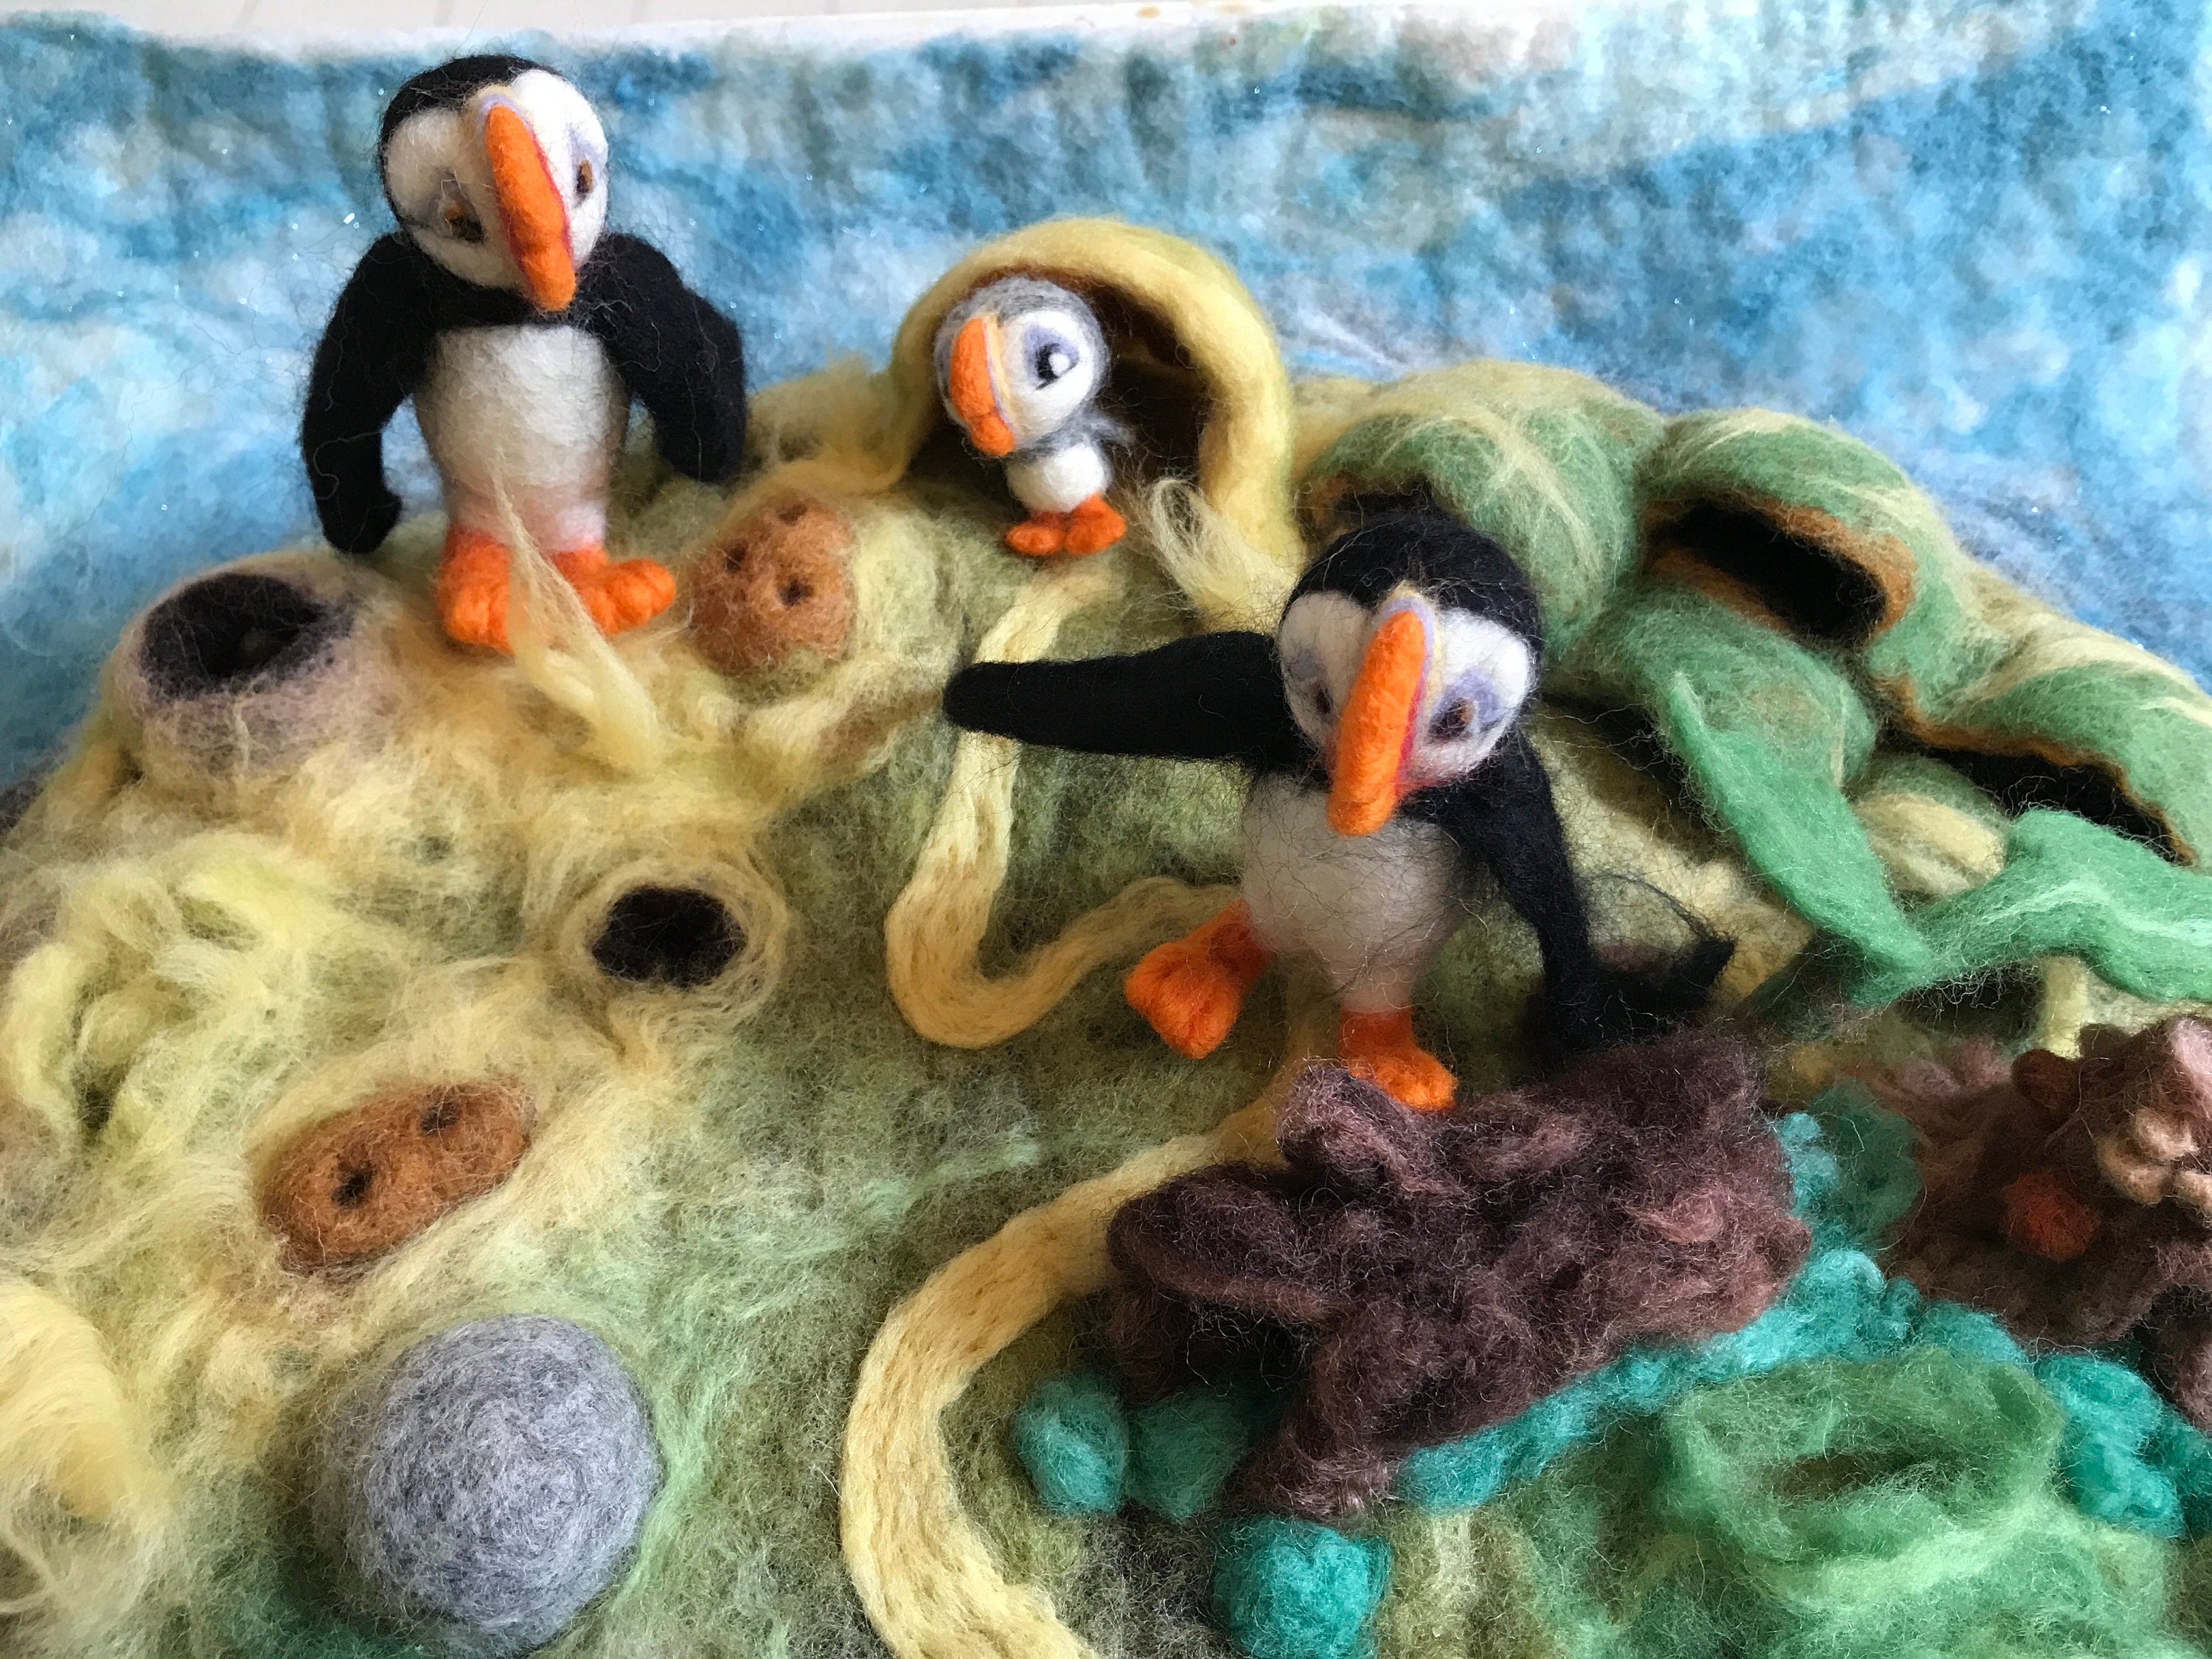 Puffin Mossy,Oona,Baba,Tiny toys,Baby puffin toy Gift for puffin fan Puffin Rock Inspired Montessori toys dolls crocchet Woodland felt toy